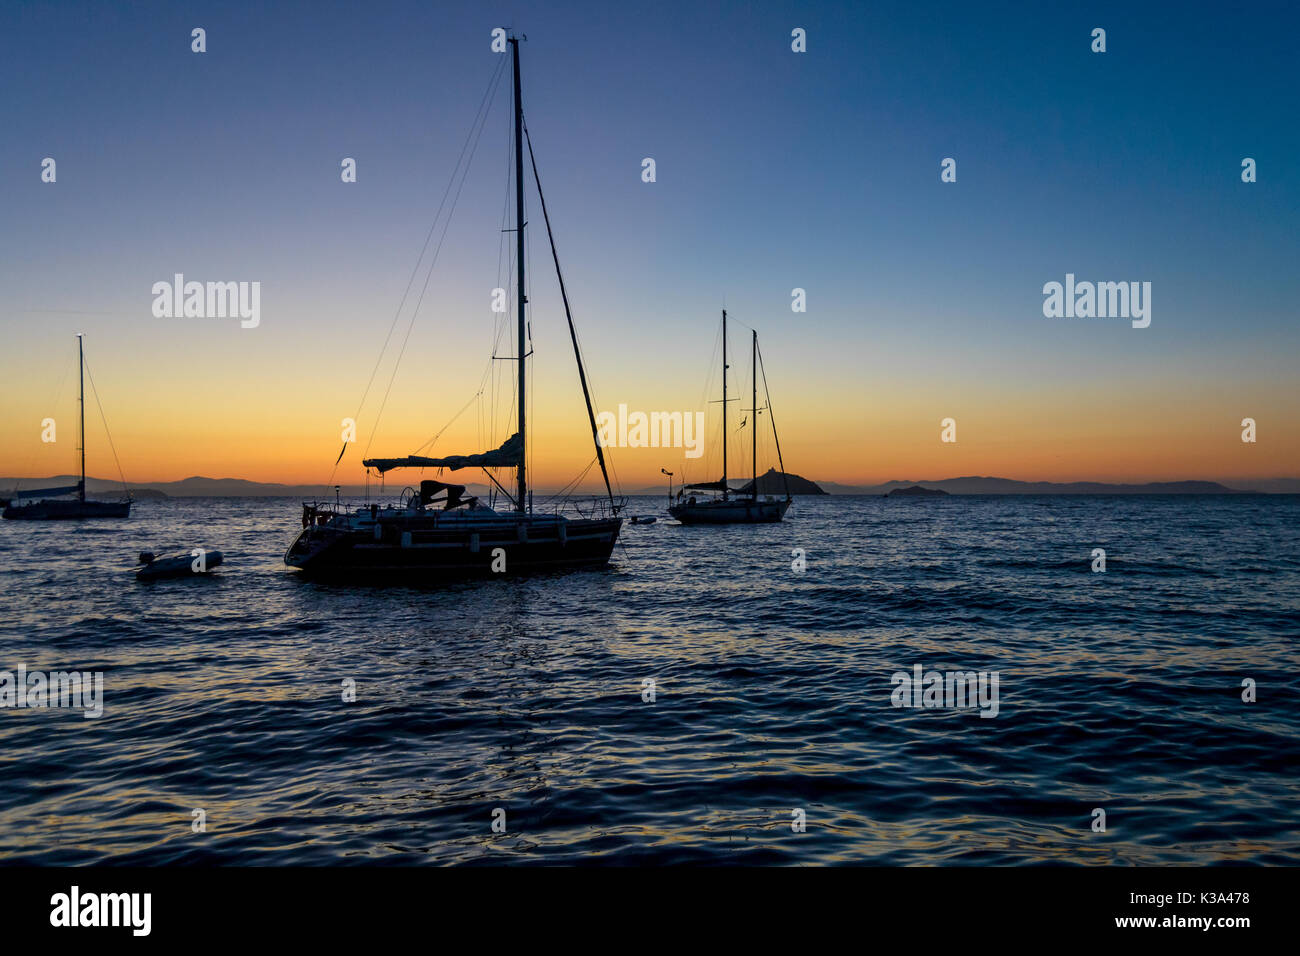 evening relaxing time on sailing boat Stock Photo